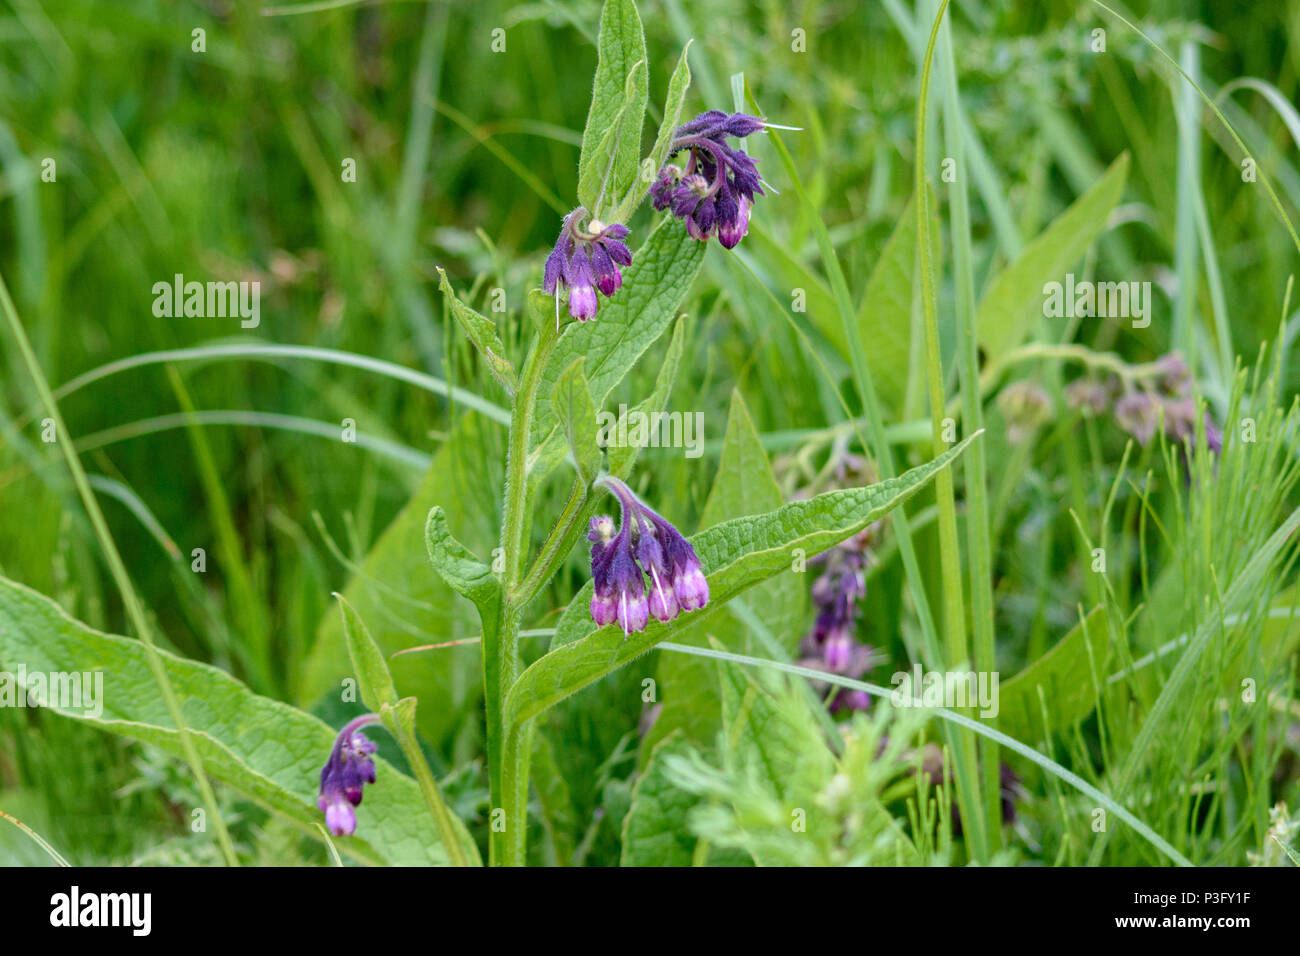 Purple and pink comfrey flowers surrounded by grass and wild plants and flowers Stock Photo